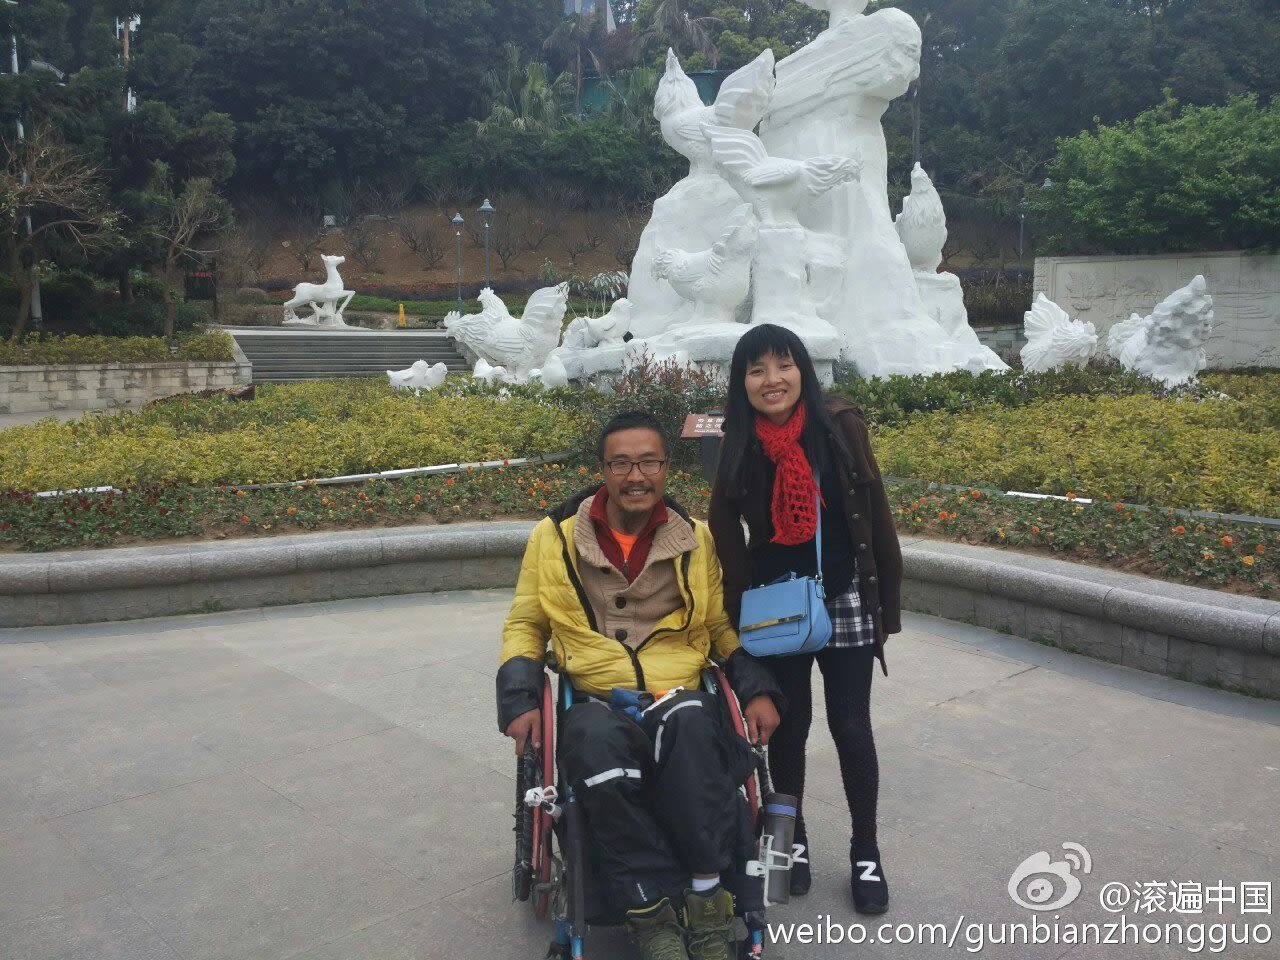 Quan Peng says he's grateful for help offered by warm-hearted people he met along the way.